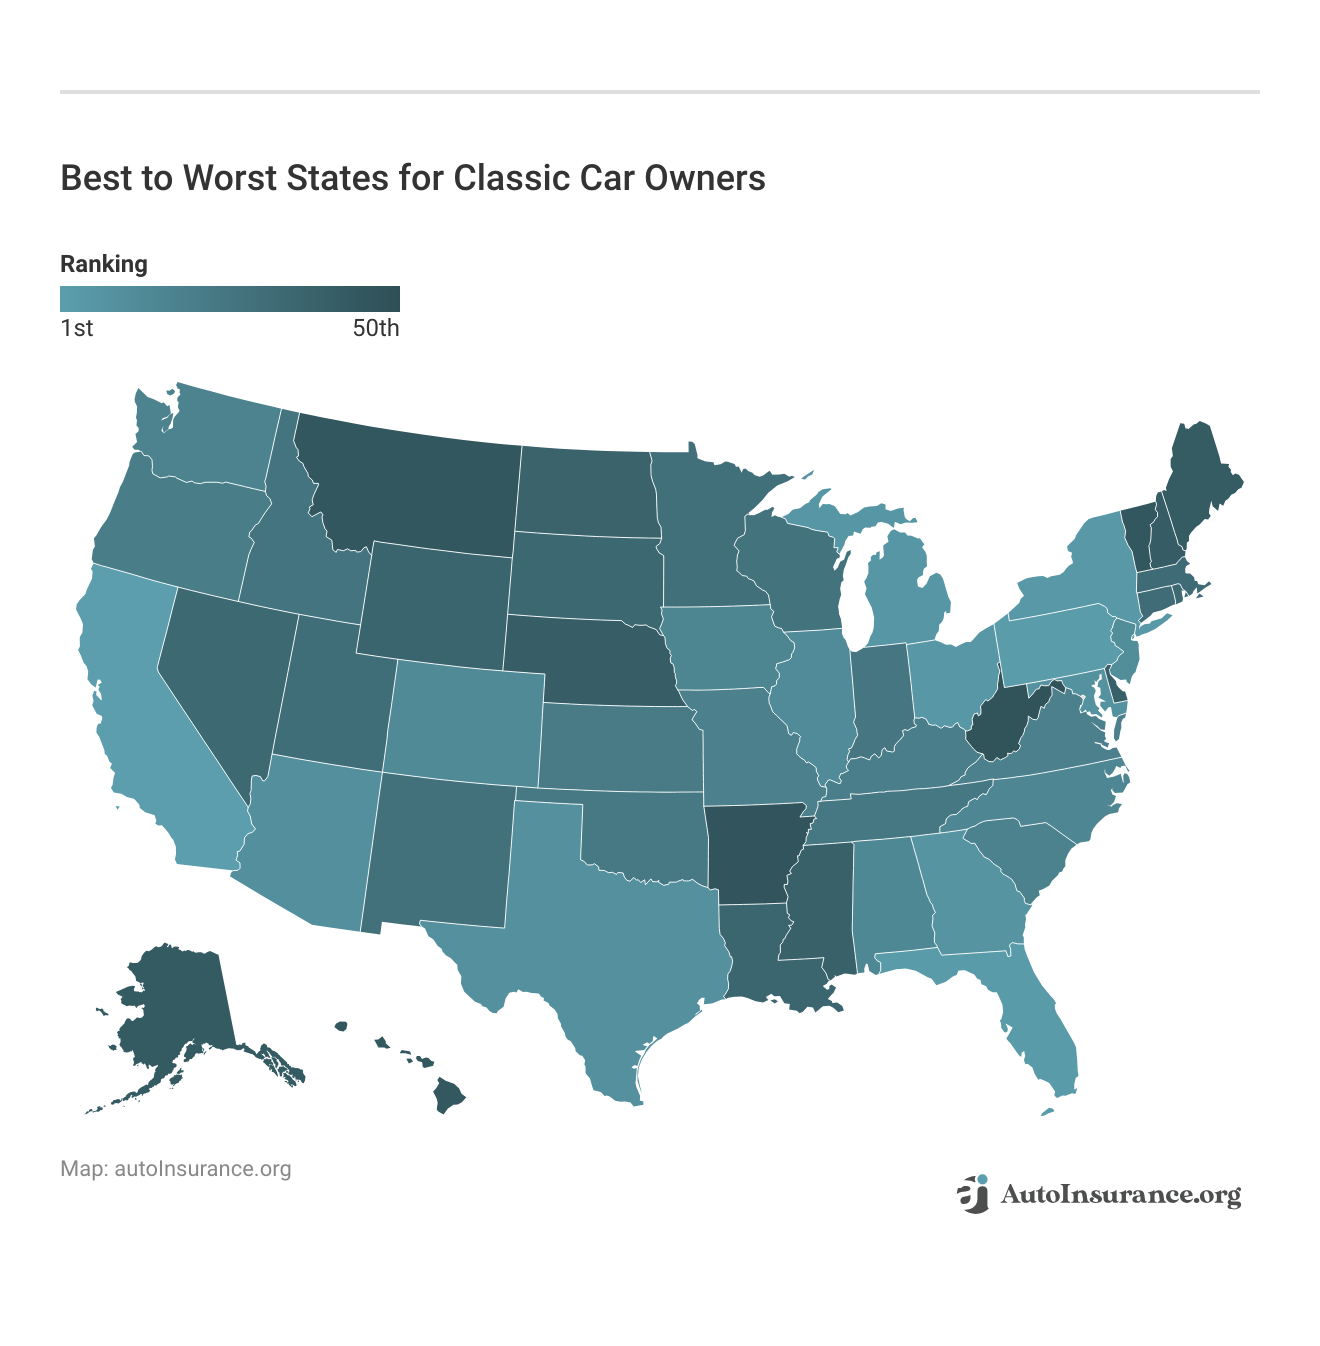 <h3>Best to Worst States for Classic Car Owners</h3>